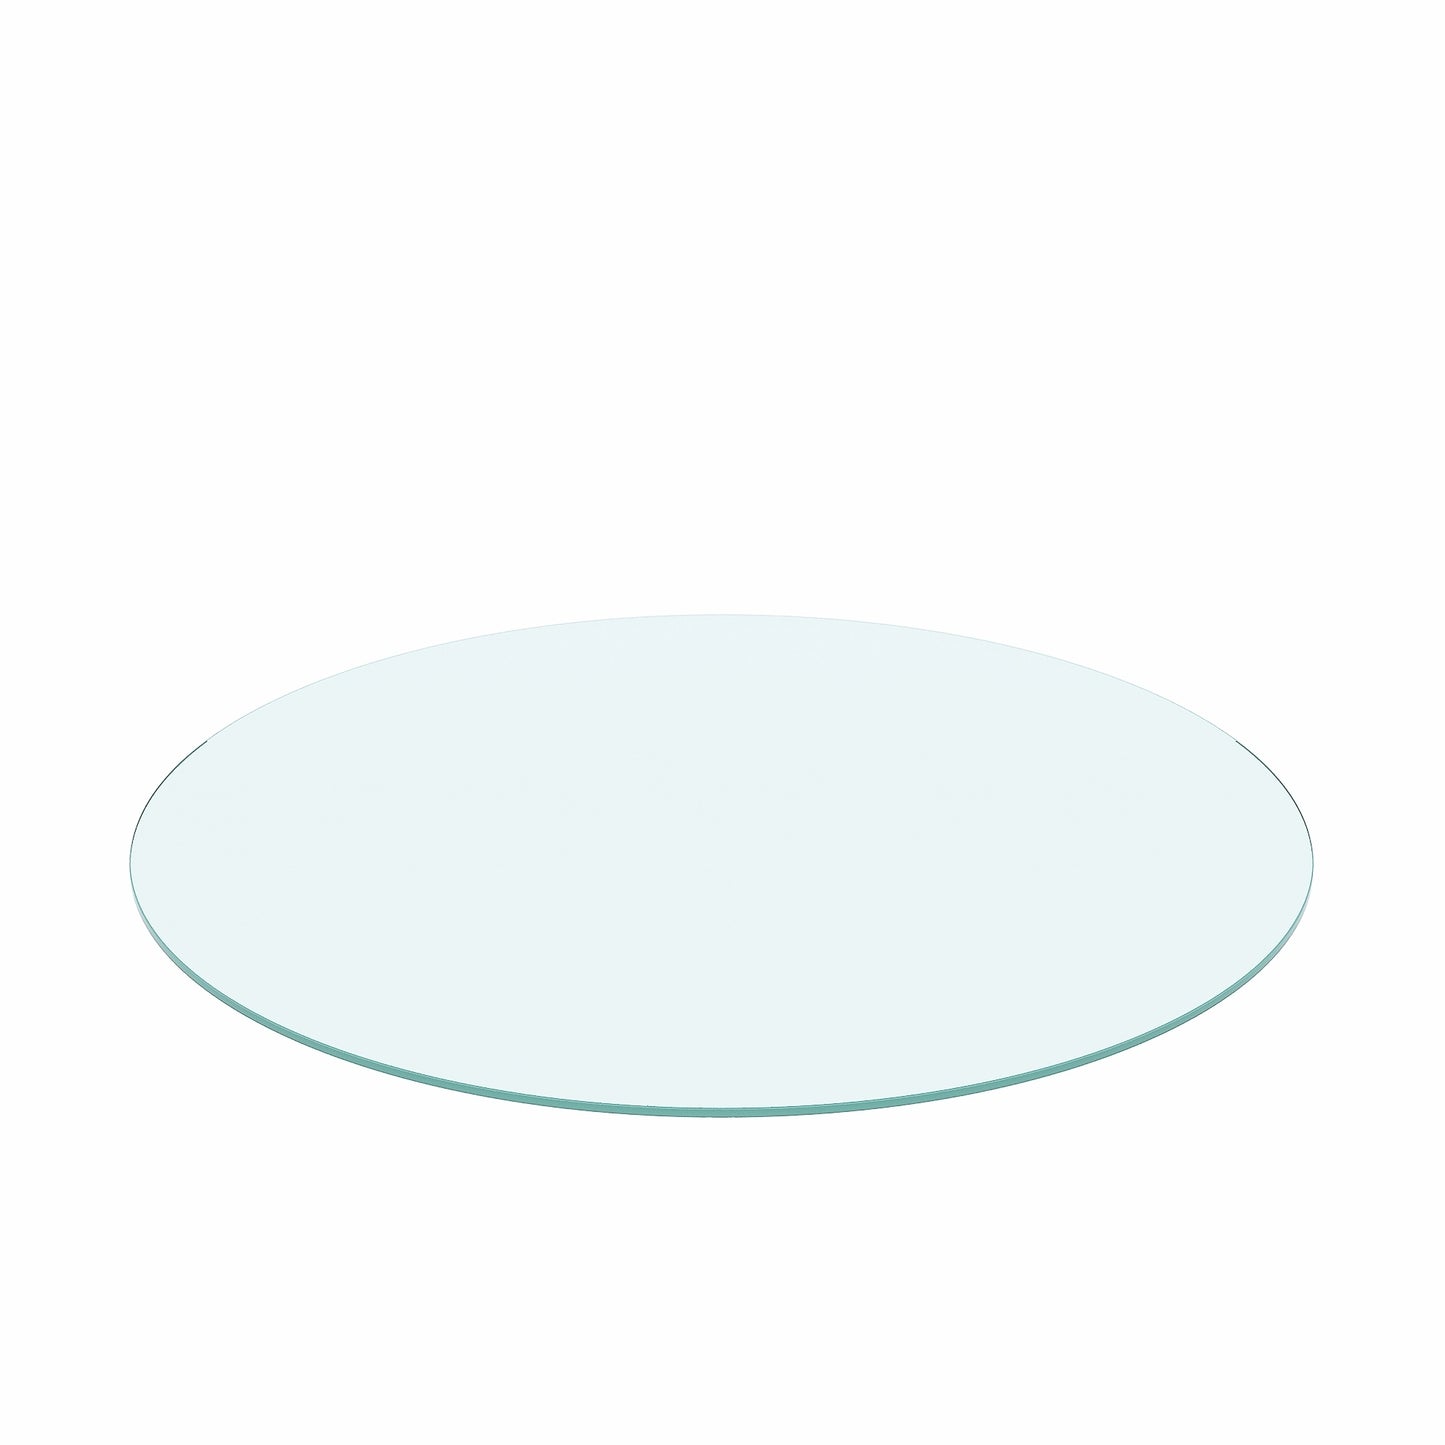 Round Tempered Glass End Table